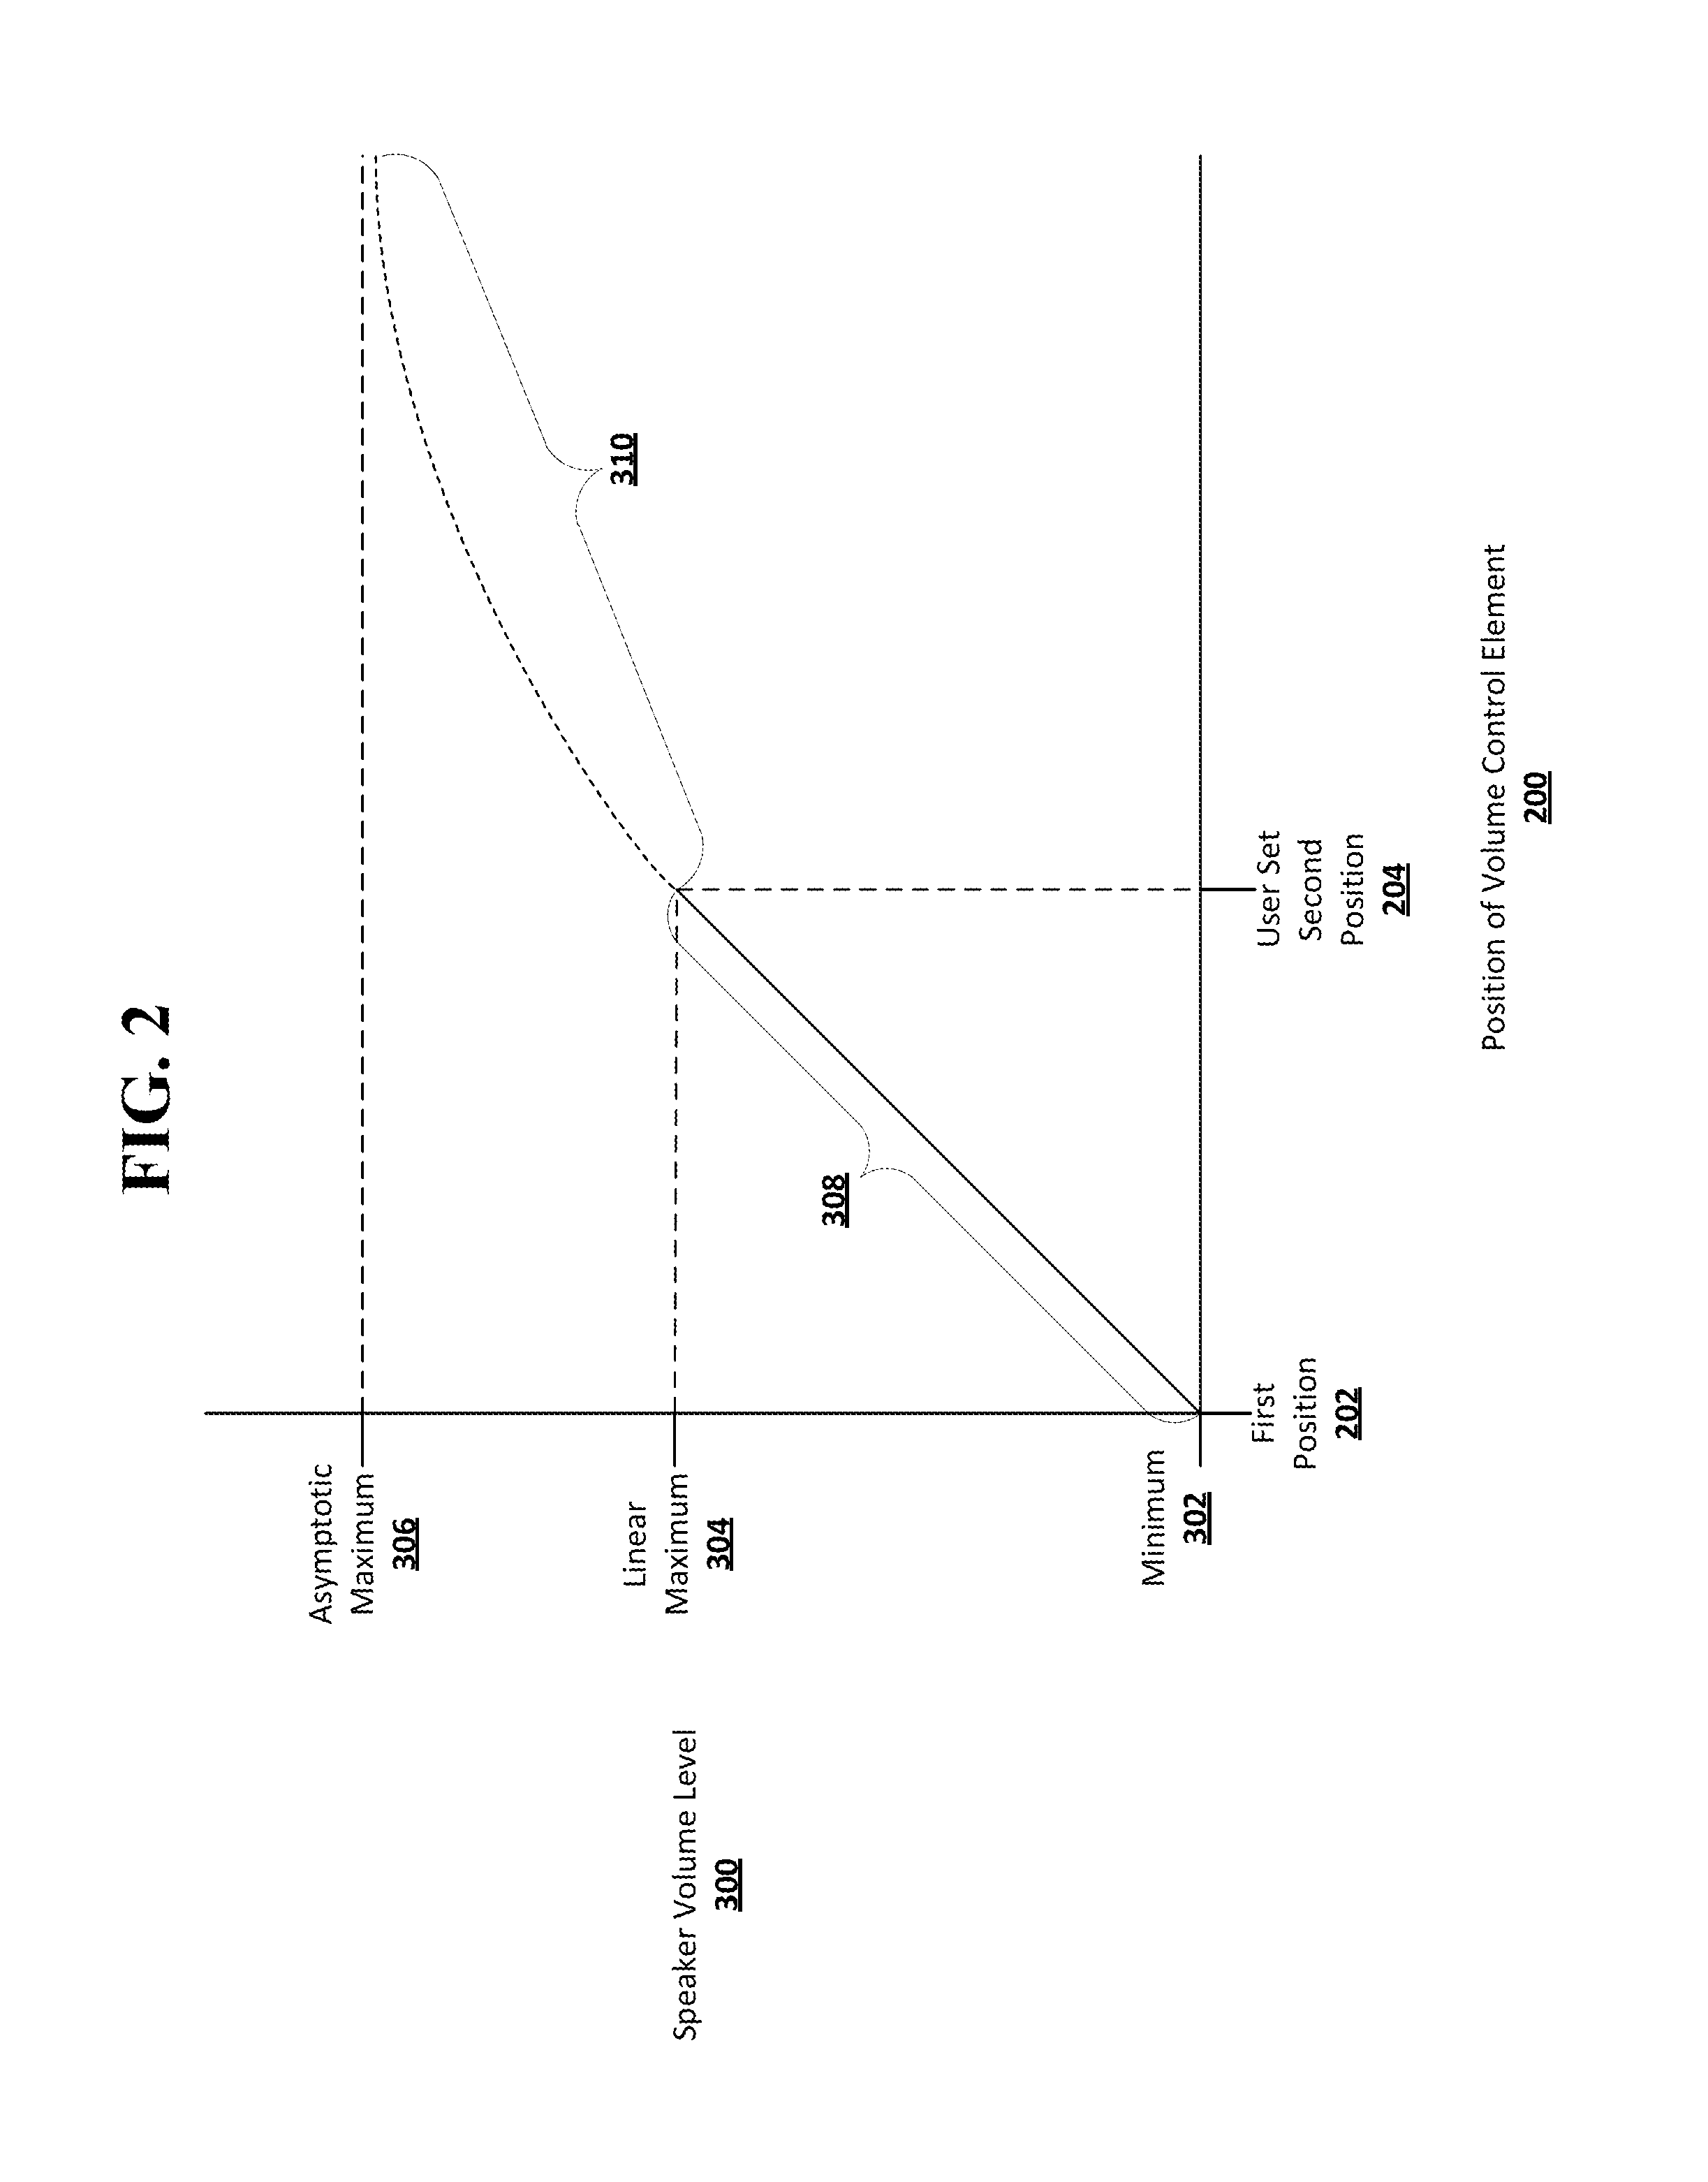 Method for controlling volume using a rotating knob interface